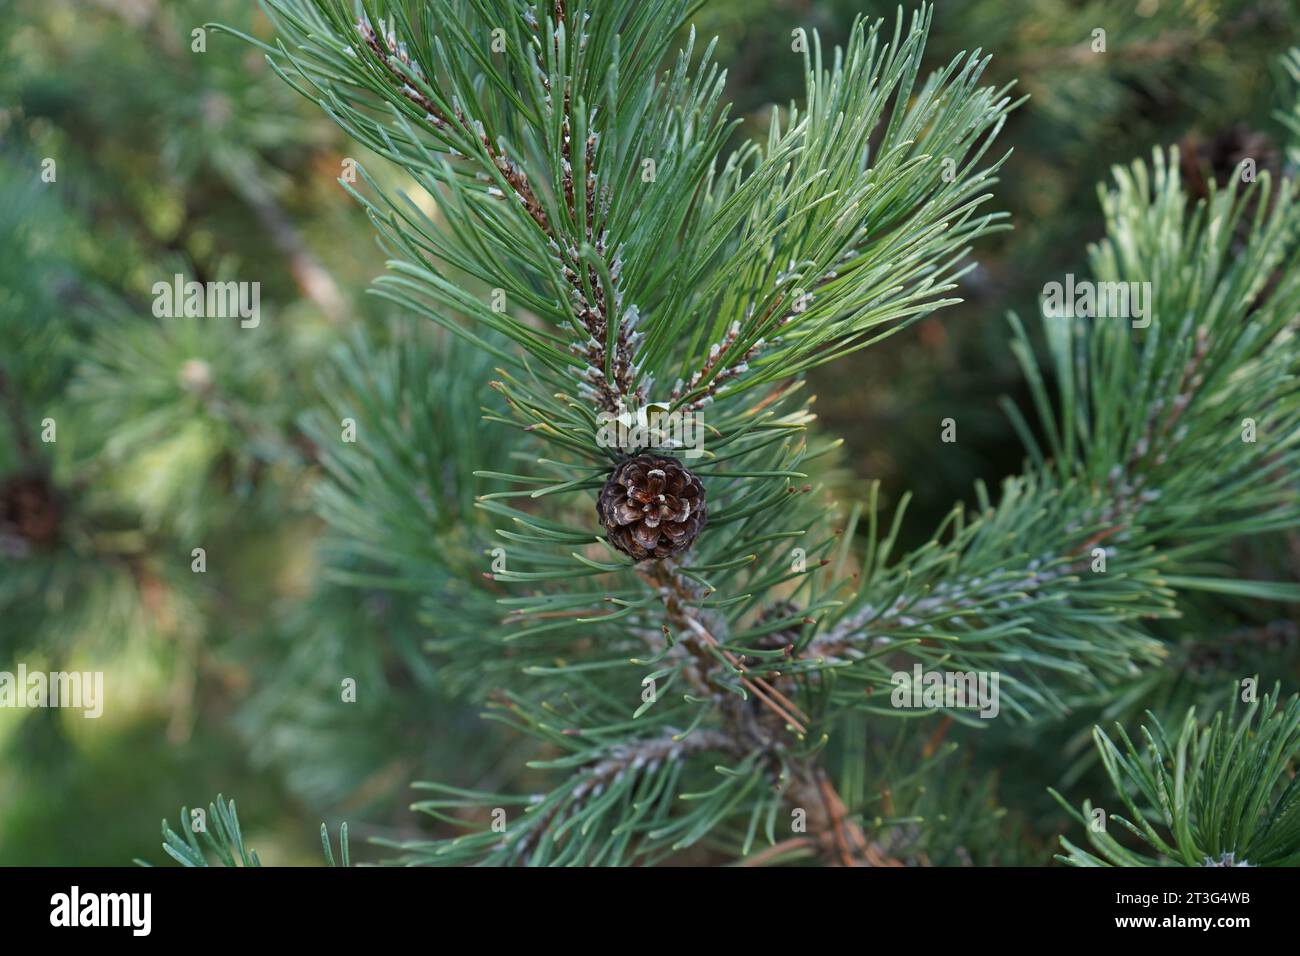 Pinus uncinata(Mountain pine) is a plant with glossy-textured asymmetrical cones, the scales of which are much thicker on the upper side. Stock Photo